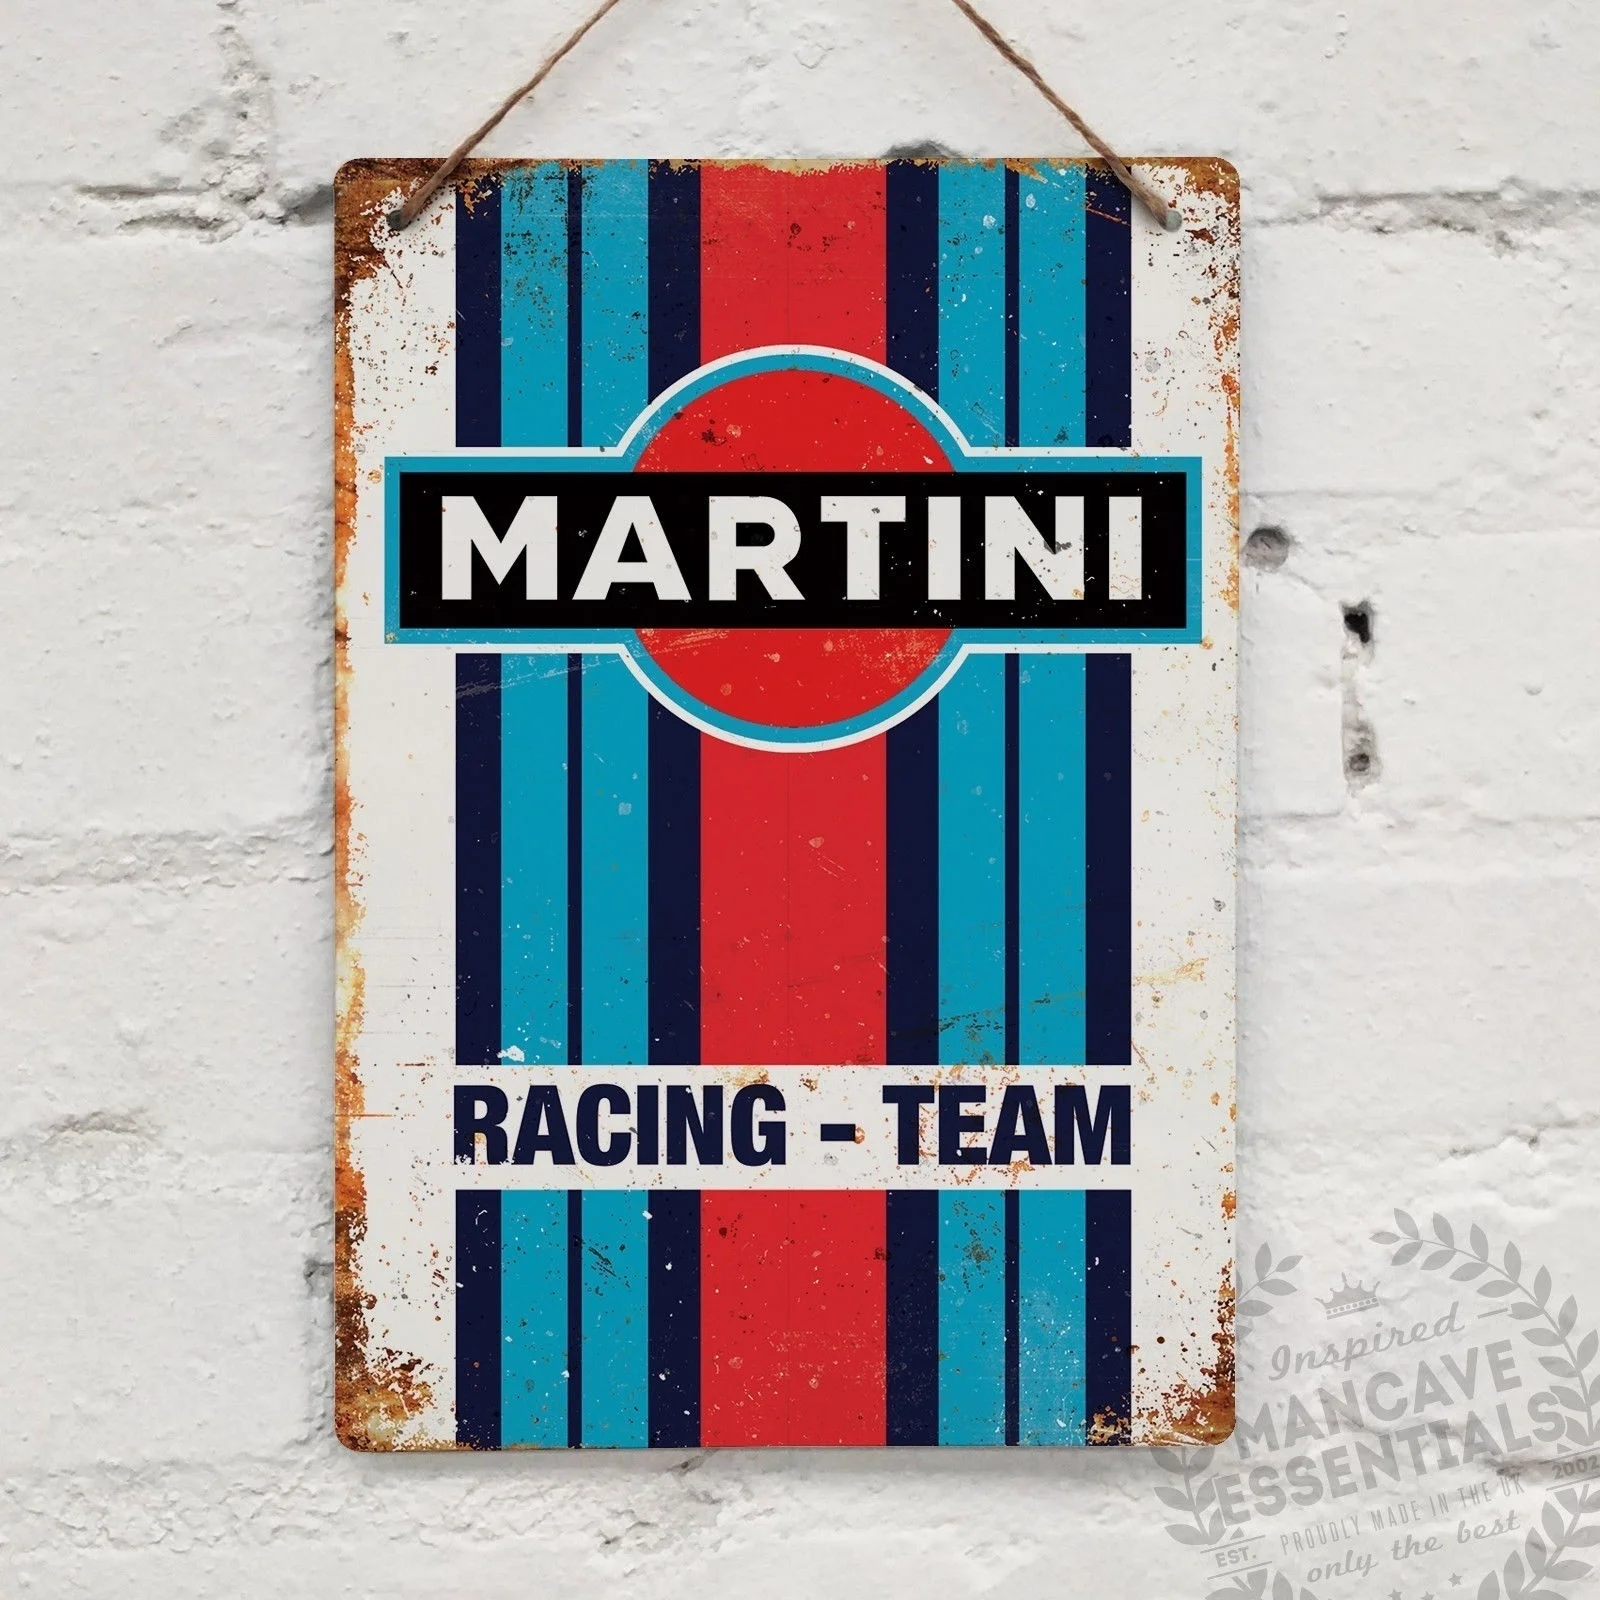 

MARTINI RACING Replica Vintage Metal Wall Sign Plaque Retro Garage Shed Car(Visit Our Store, More Products!!!)